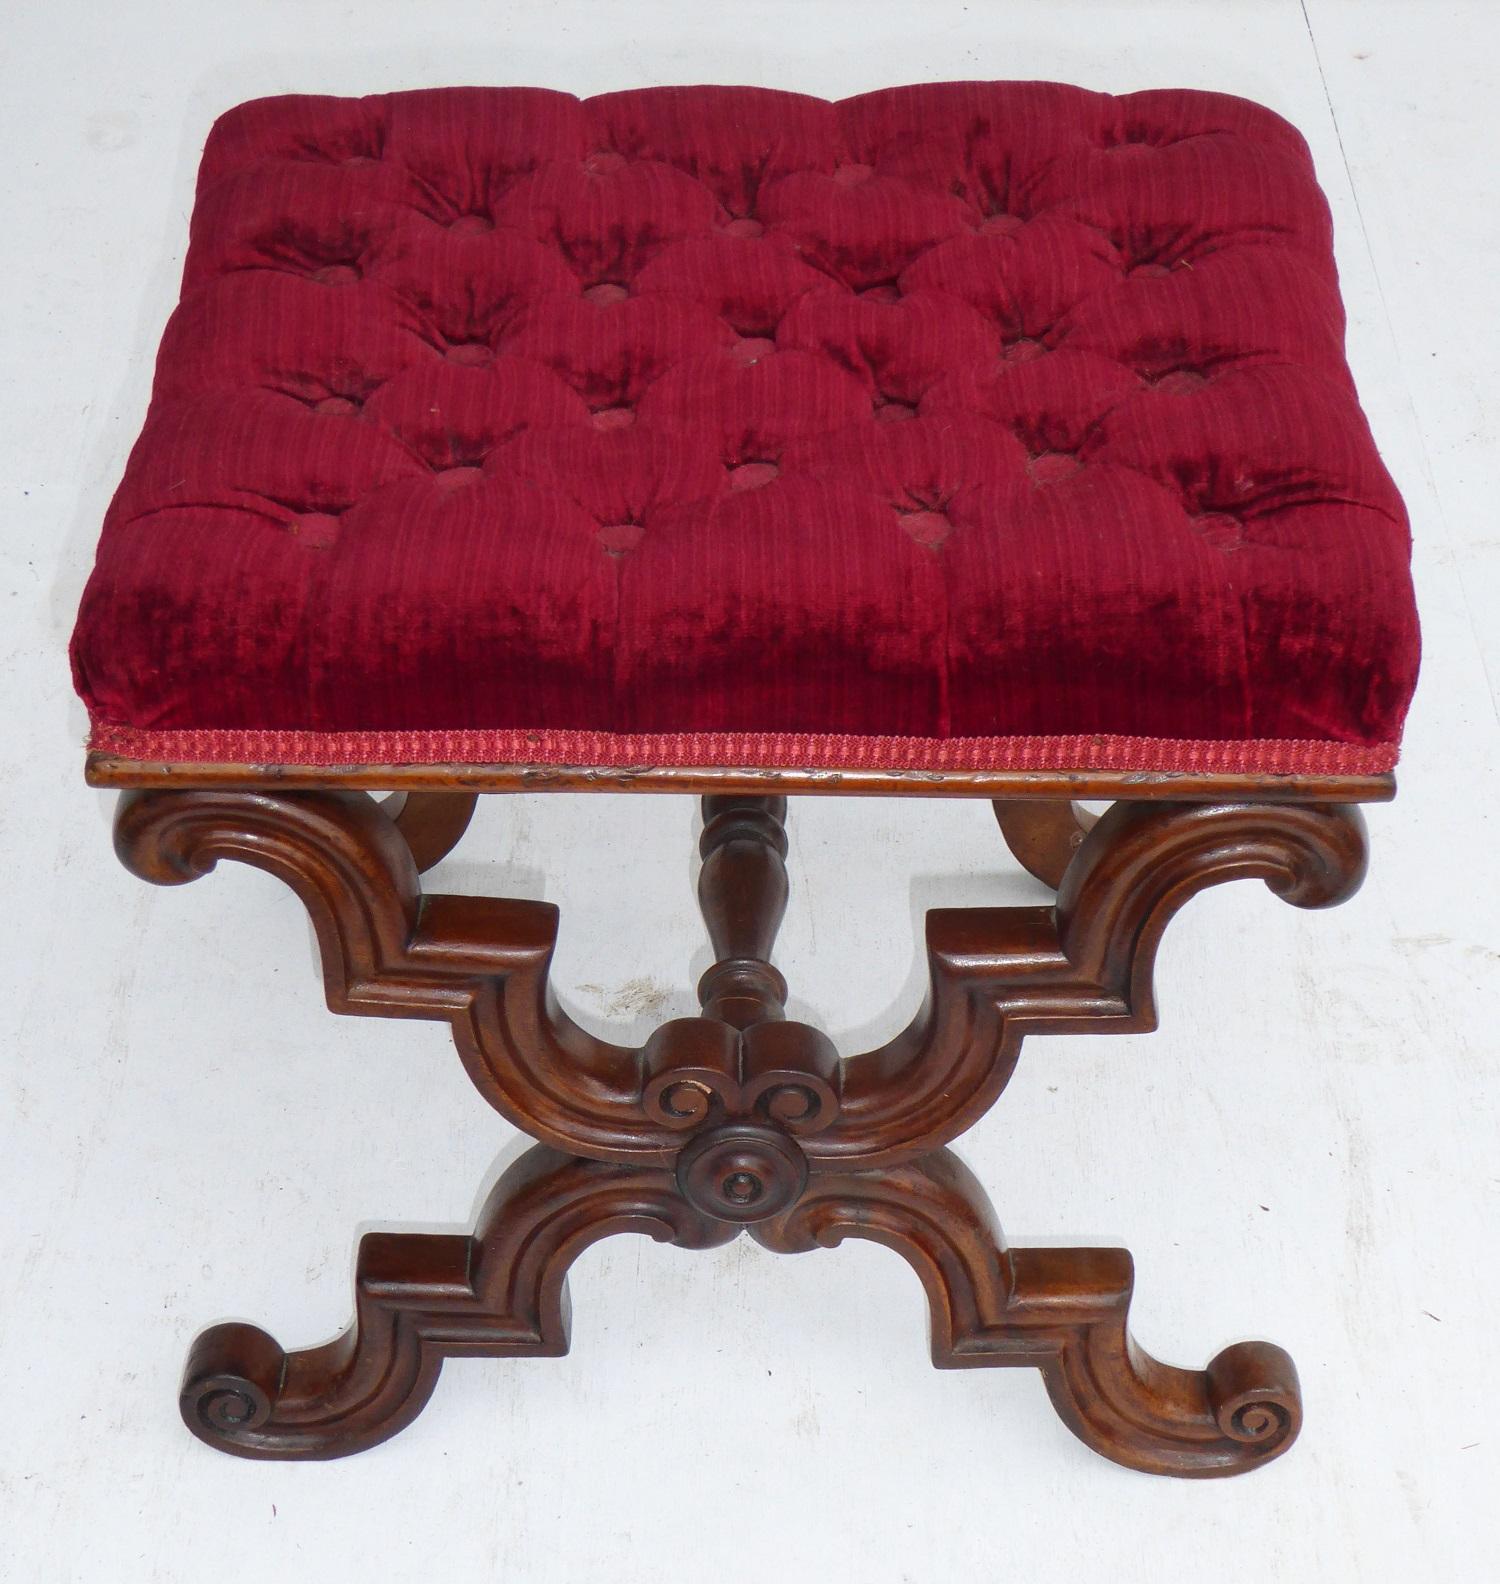 For sale is a good quality William IV mahogany foot stool. The stool is buttoned and upholstered in a red fabric. It is in good condition for its age. 

Measures: Width 18